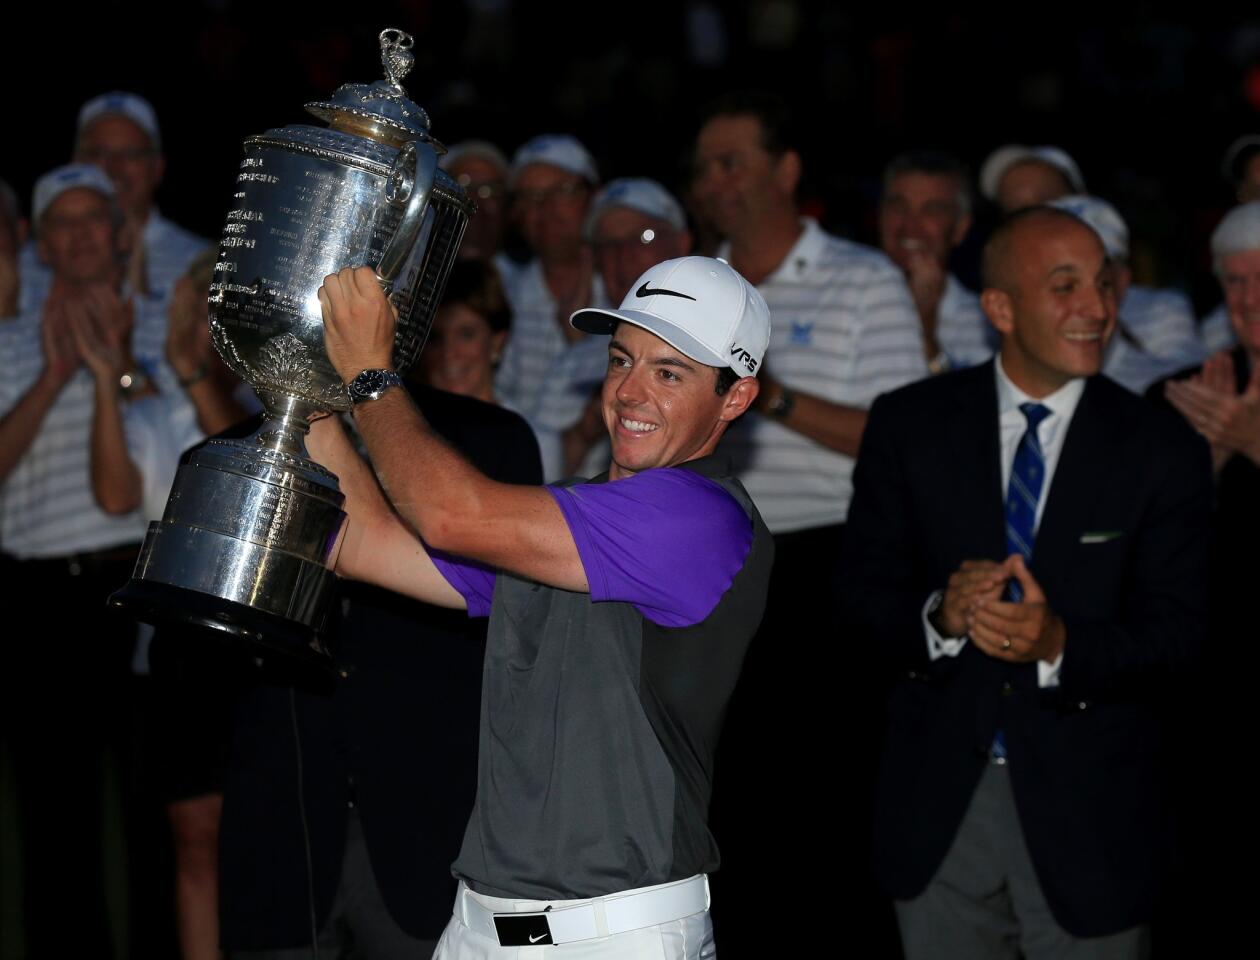 Rory McIlroy hoists the Wanamaker Trophy after winning the PGA Championship at dusk on Sunday at Valhalla Golf Club.